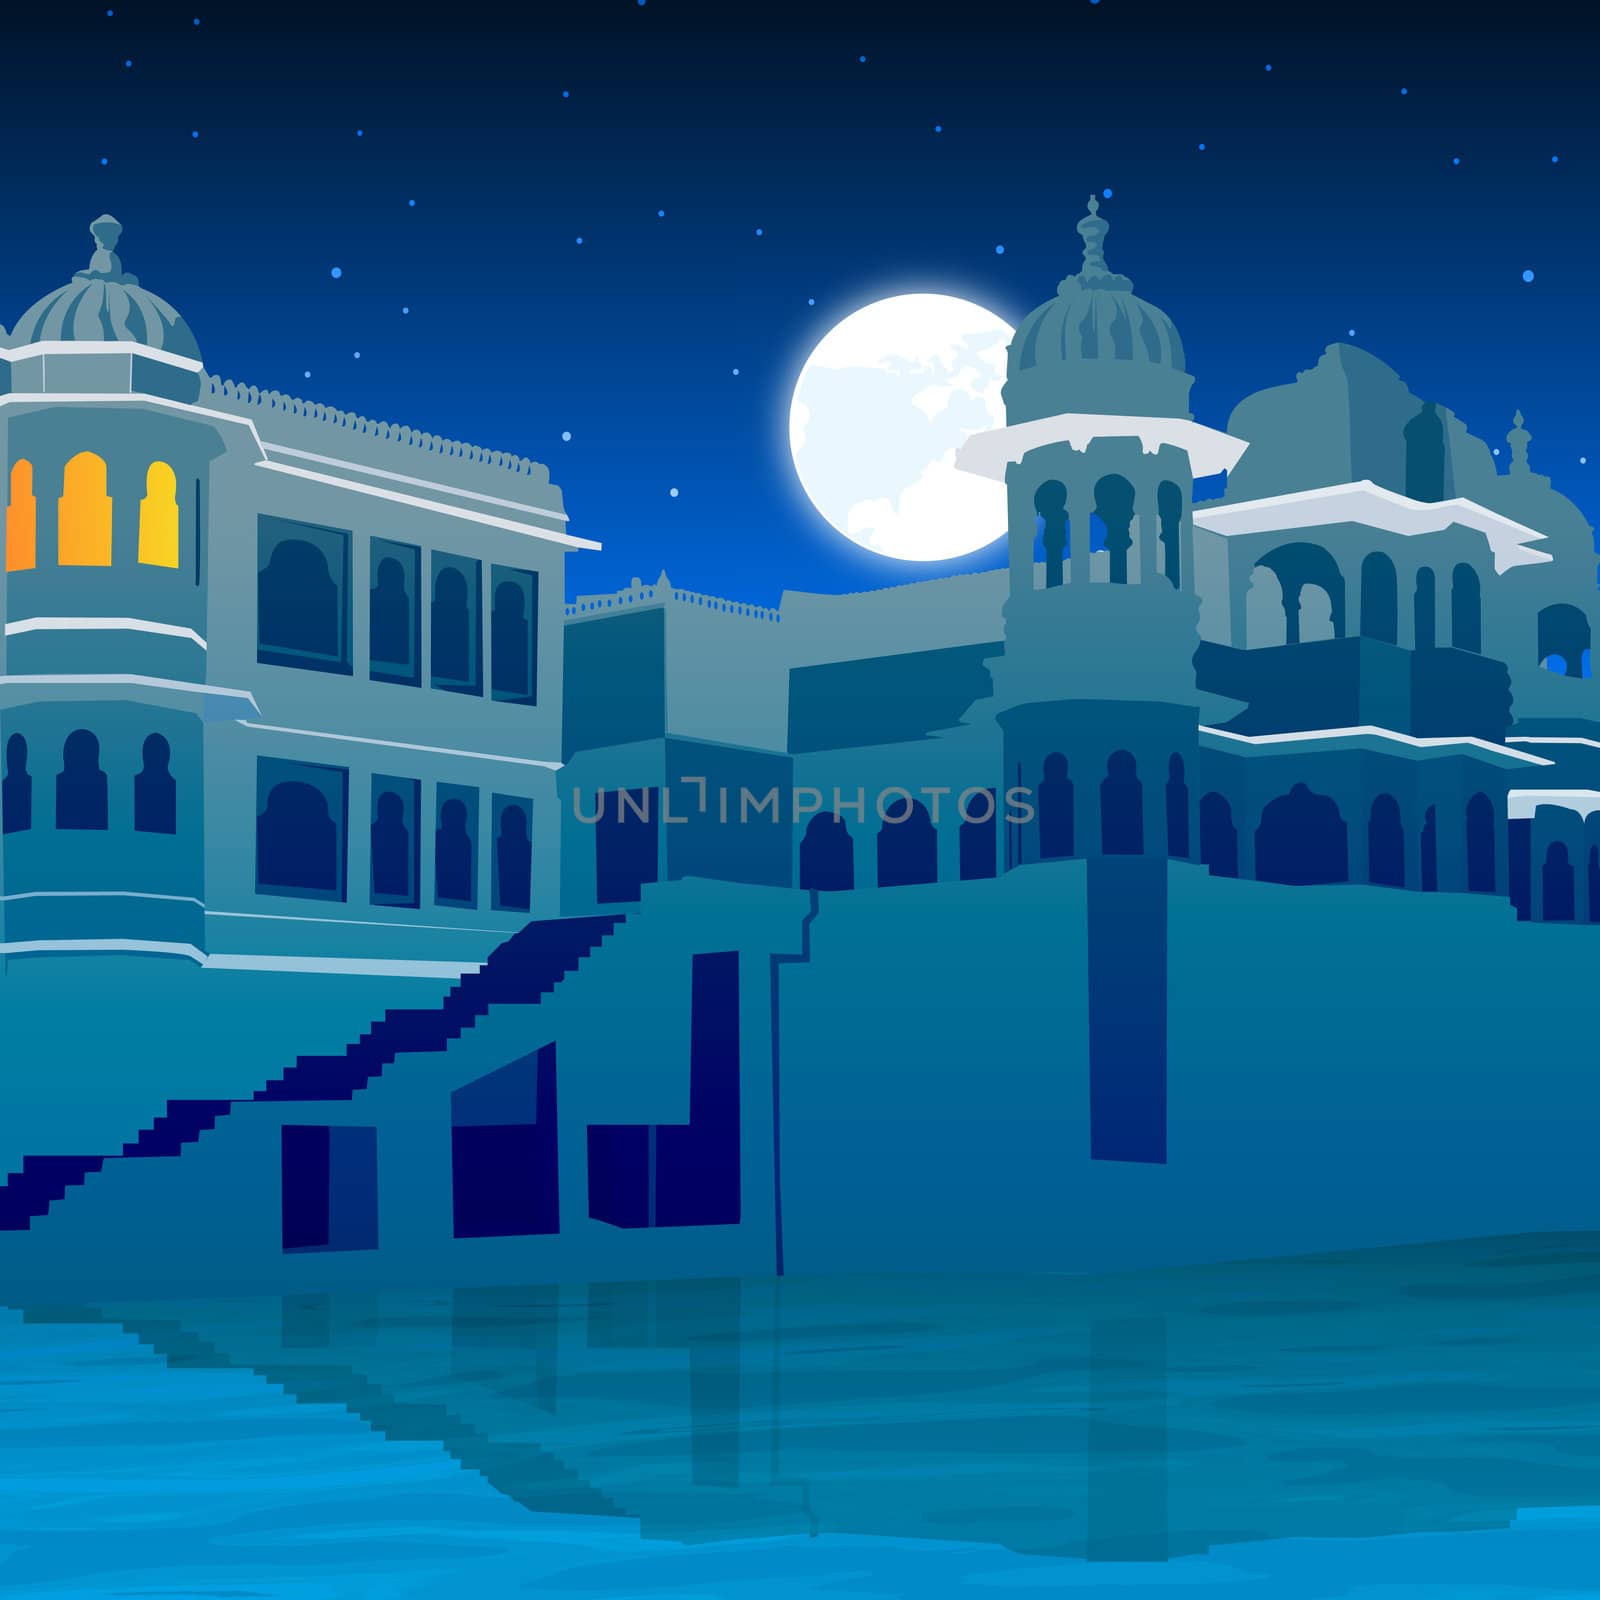 view of palace on full moon, lake side